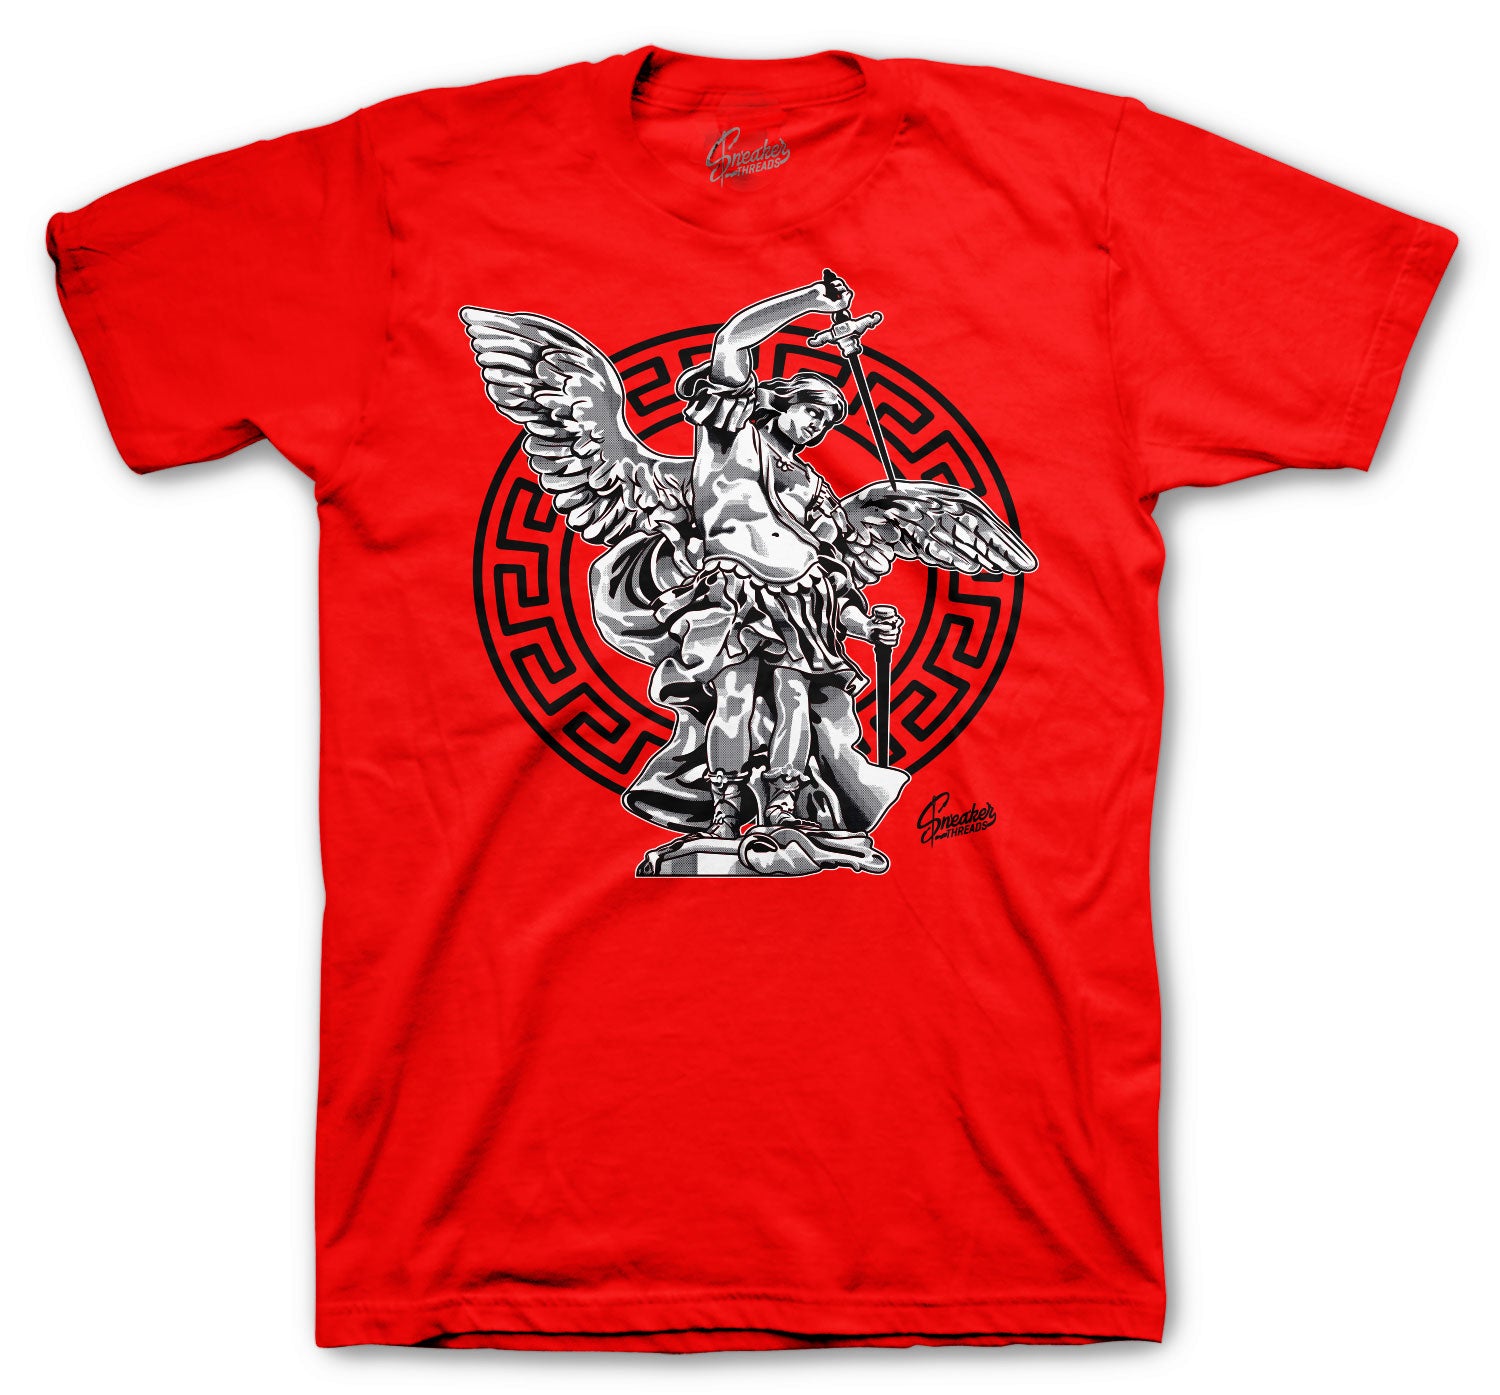 Bred 350 Shirt - St. Michael - Red